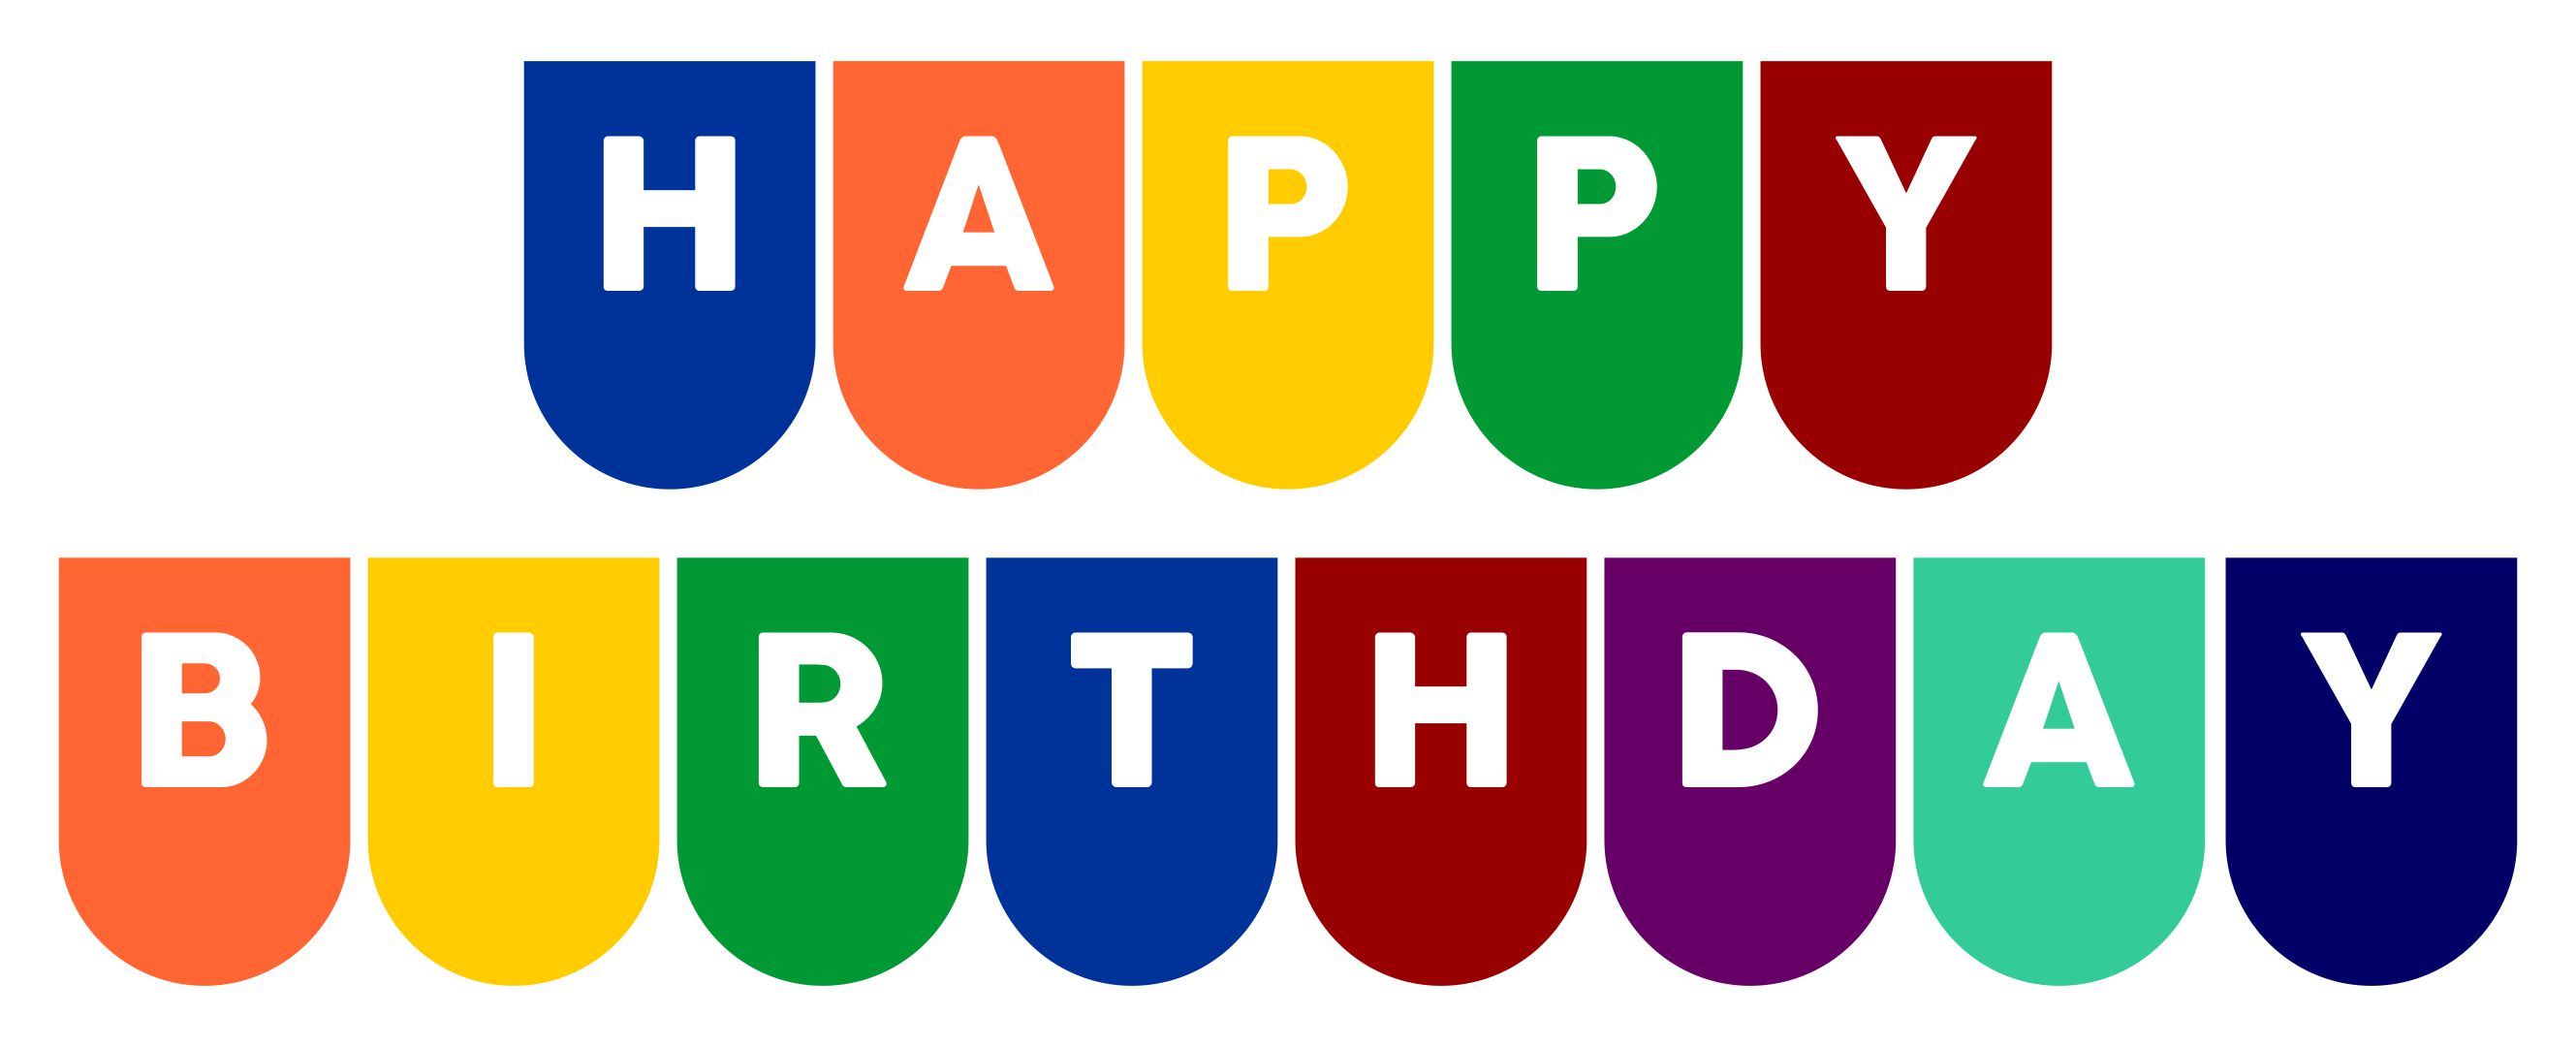 20 Best Happy Birthday Printable Banners Signs - printablee.com With Free Printable Happy Birthday Banner Templates